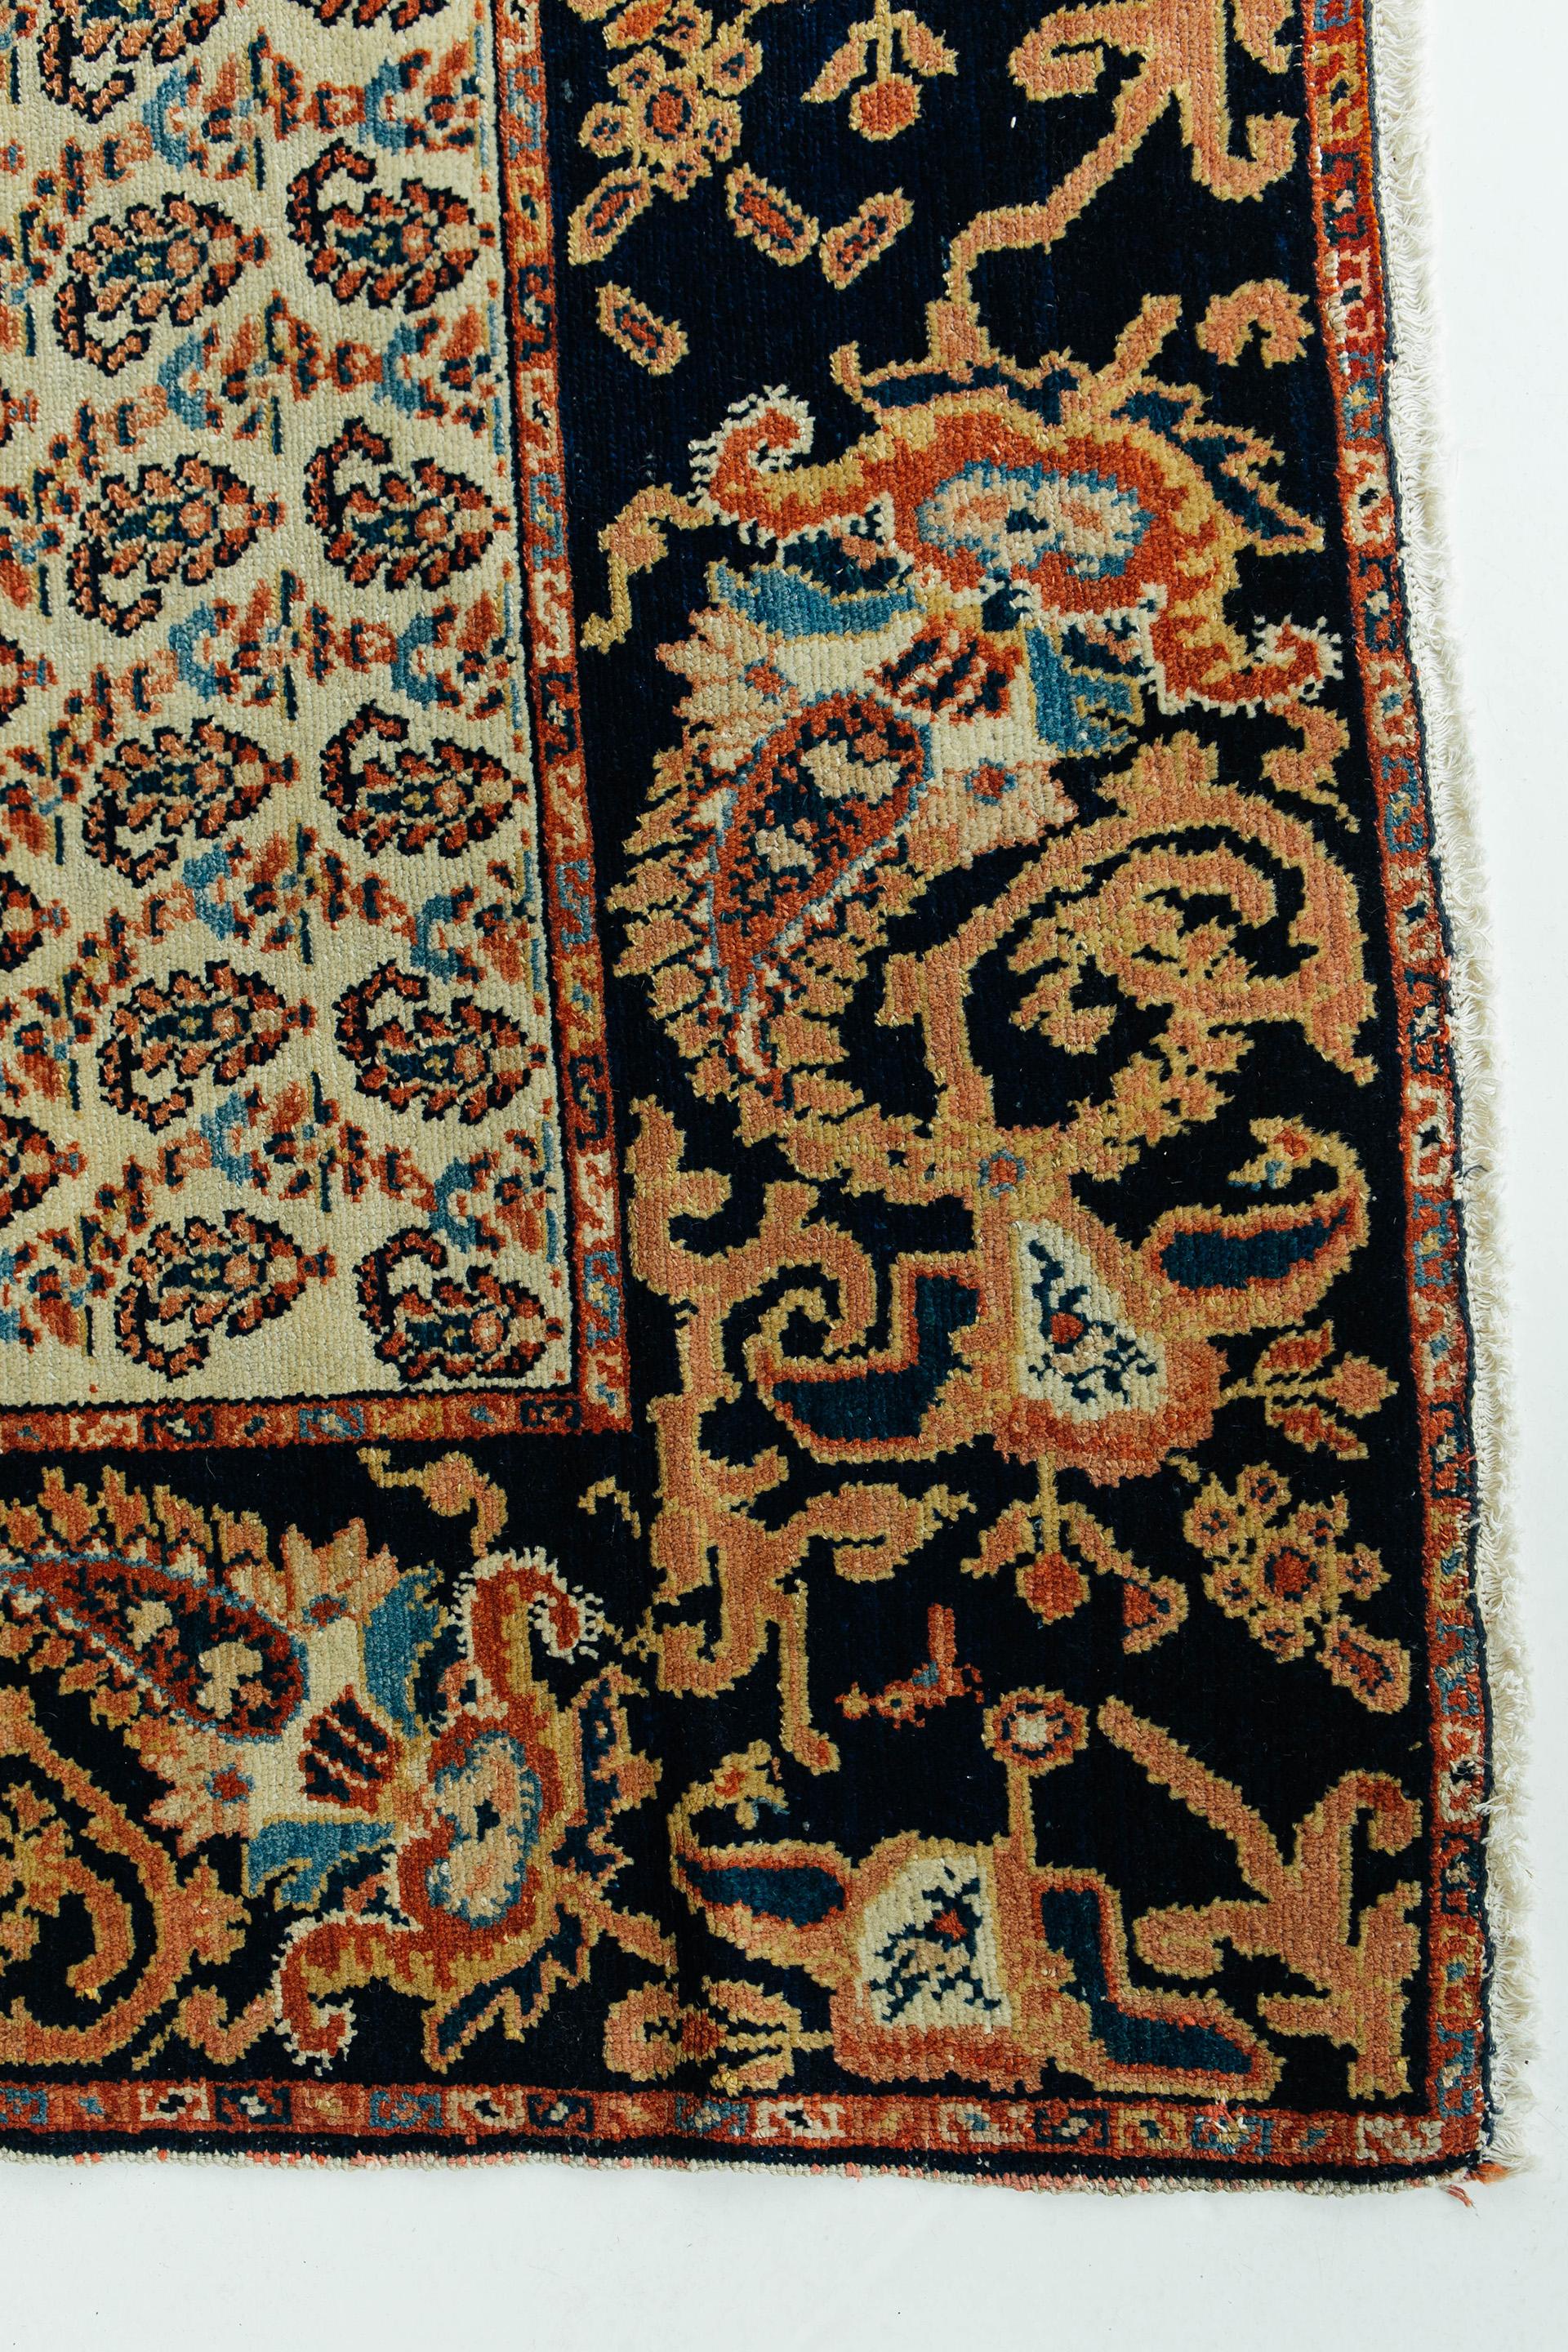 Antique Malayer with ivory field, deep indigo border, and red, pink and gold tones. This rug features an all-over repeat boteh pattern with an elaborate foliate border of large-scale boteh forms. The boteh motif is a common decorative element with